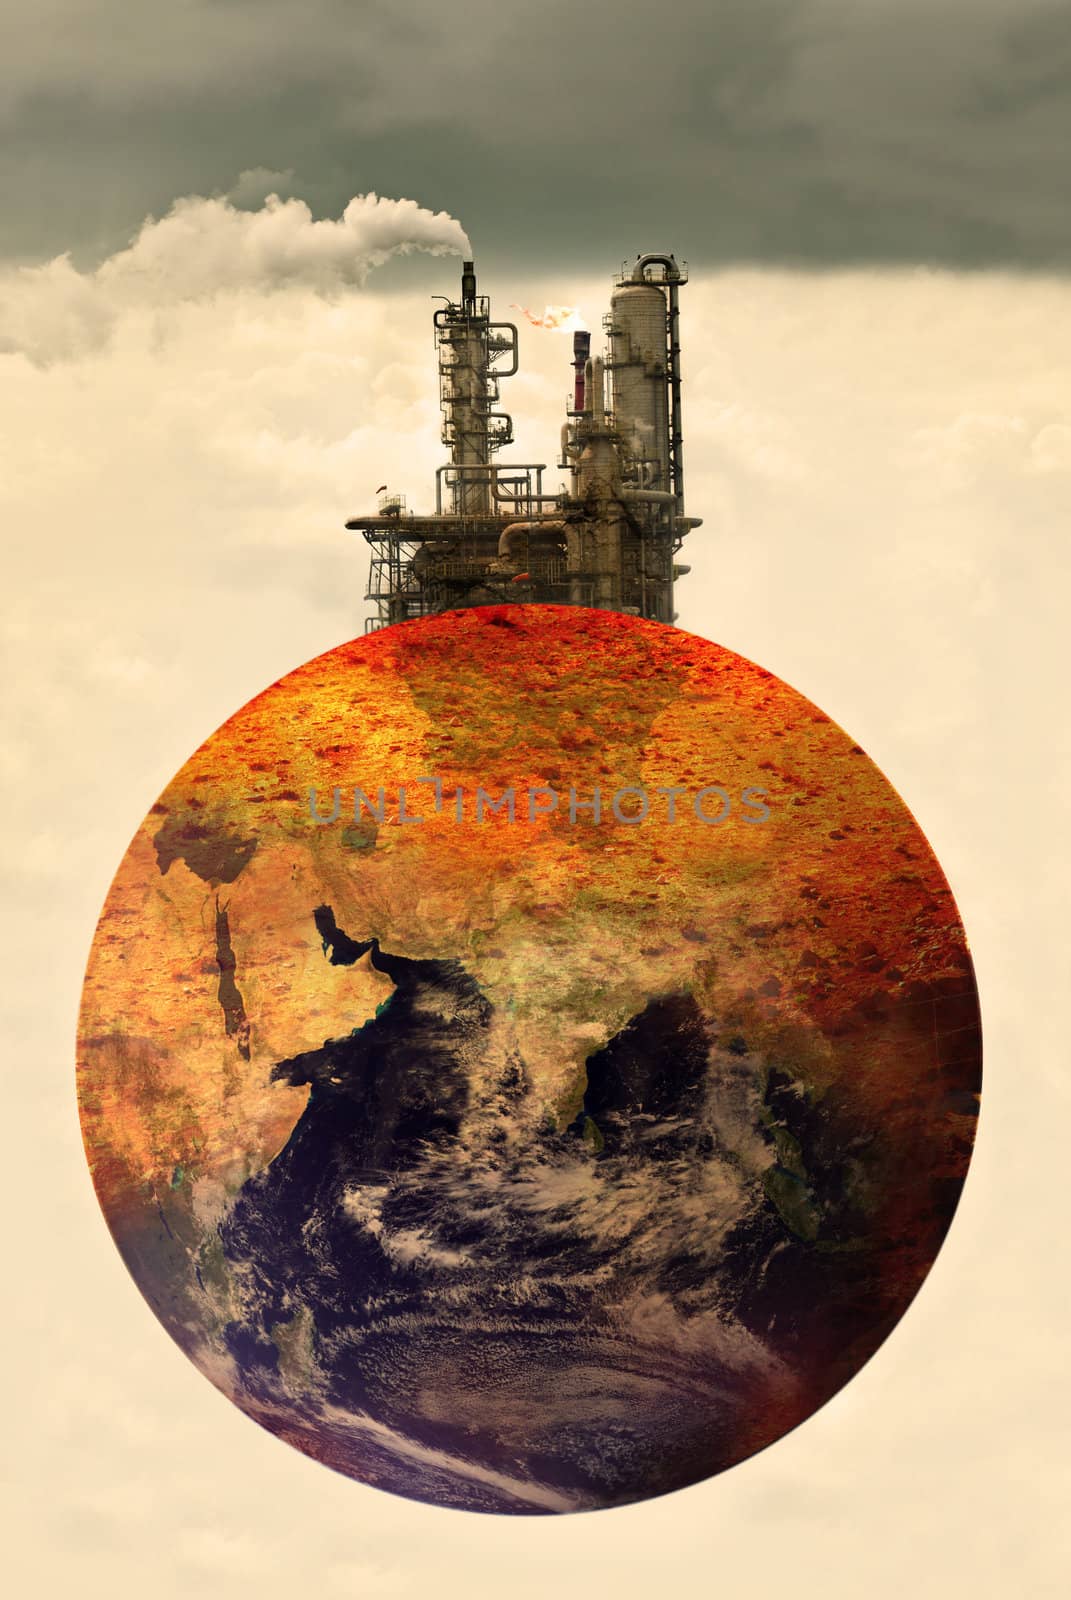 concept photo of pollution on earth by yuliang11